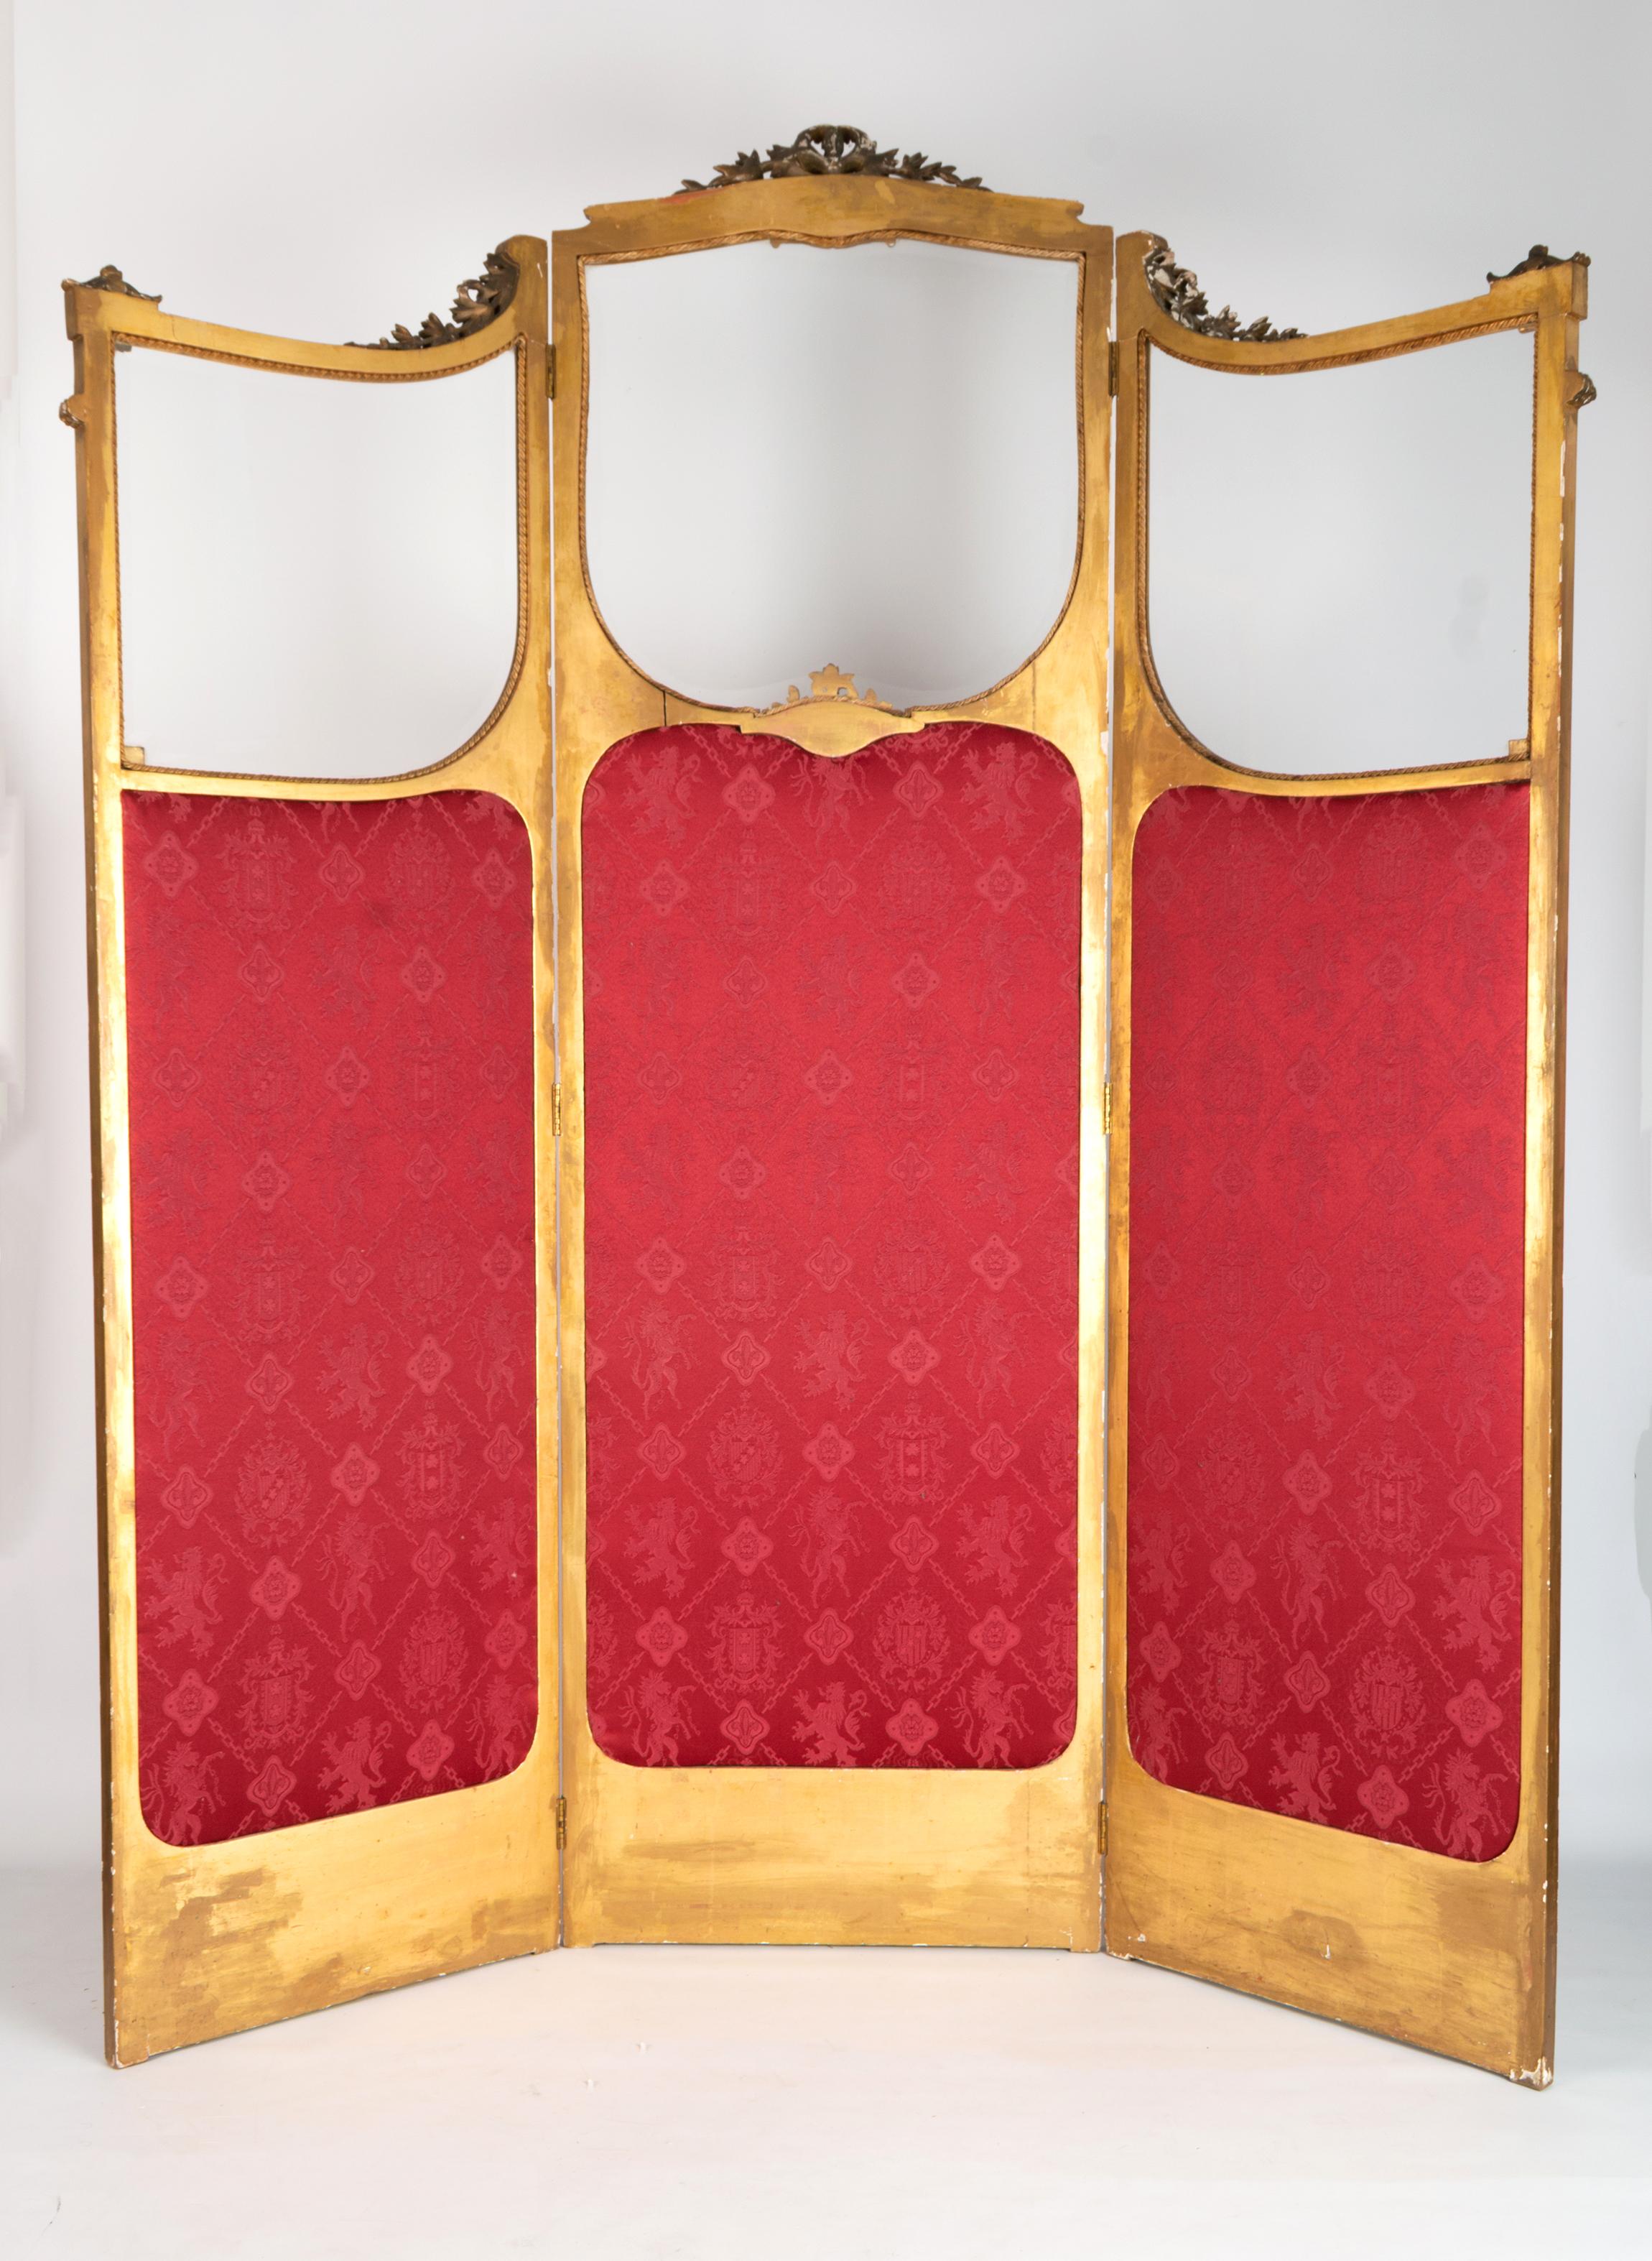 Antique 19th Century French Louis XVI Stye Gilt Three Panel Screen Room Divider For Sale 3